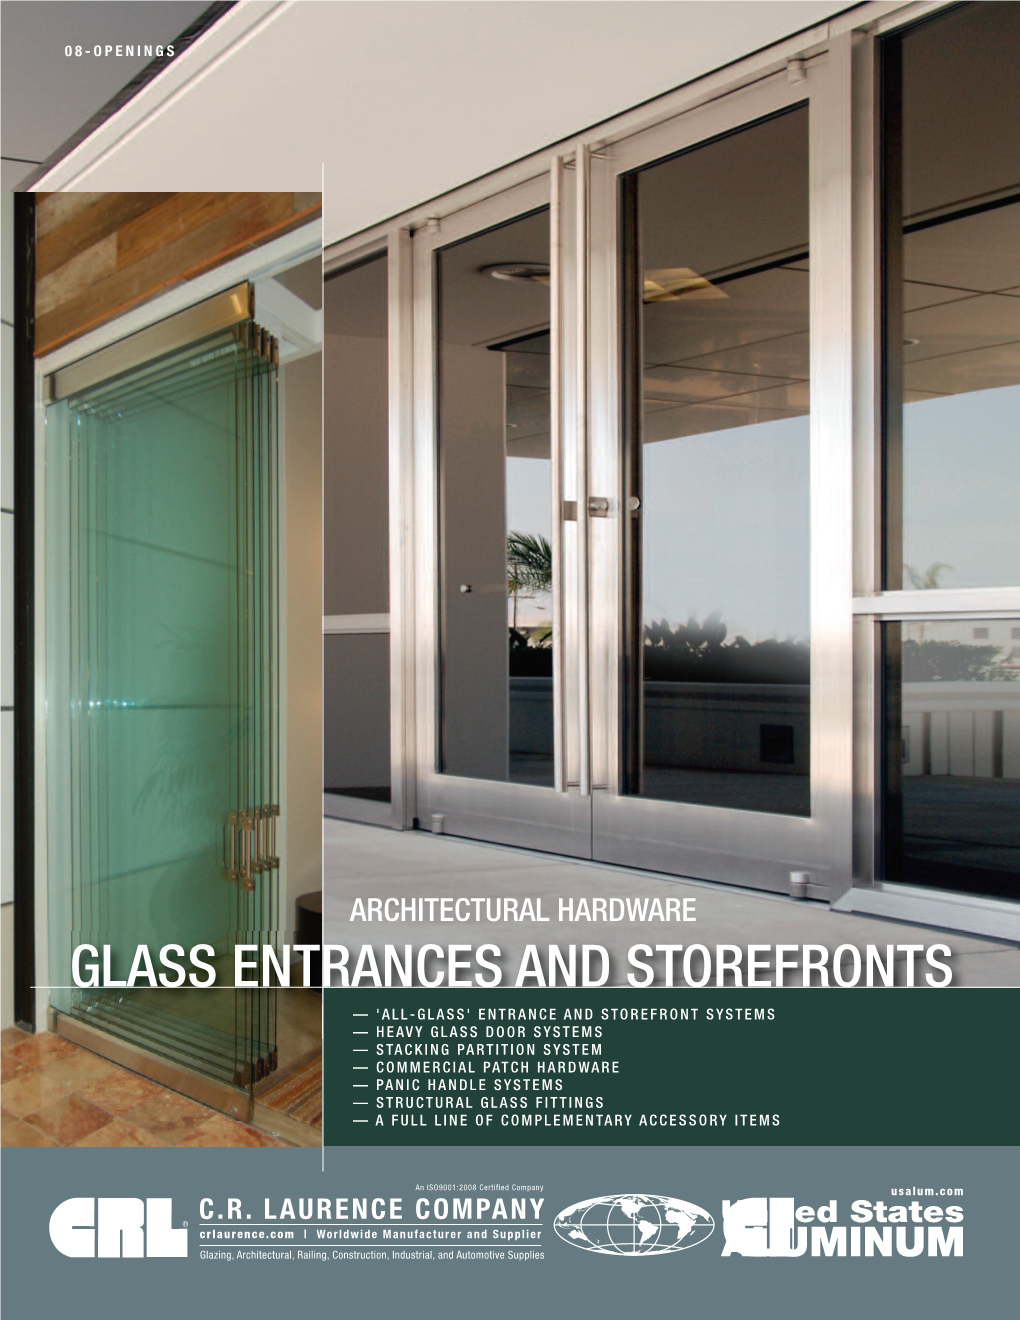 Glass Entrances and Storefronts